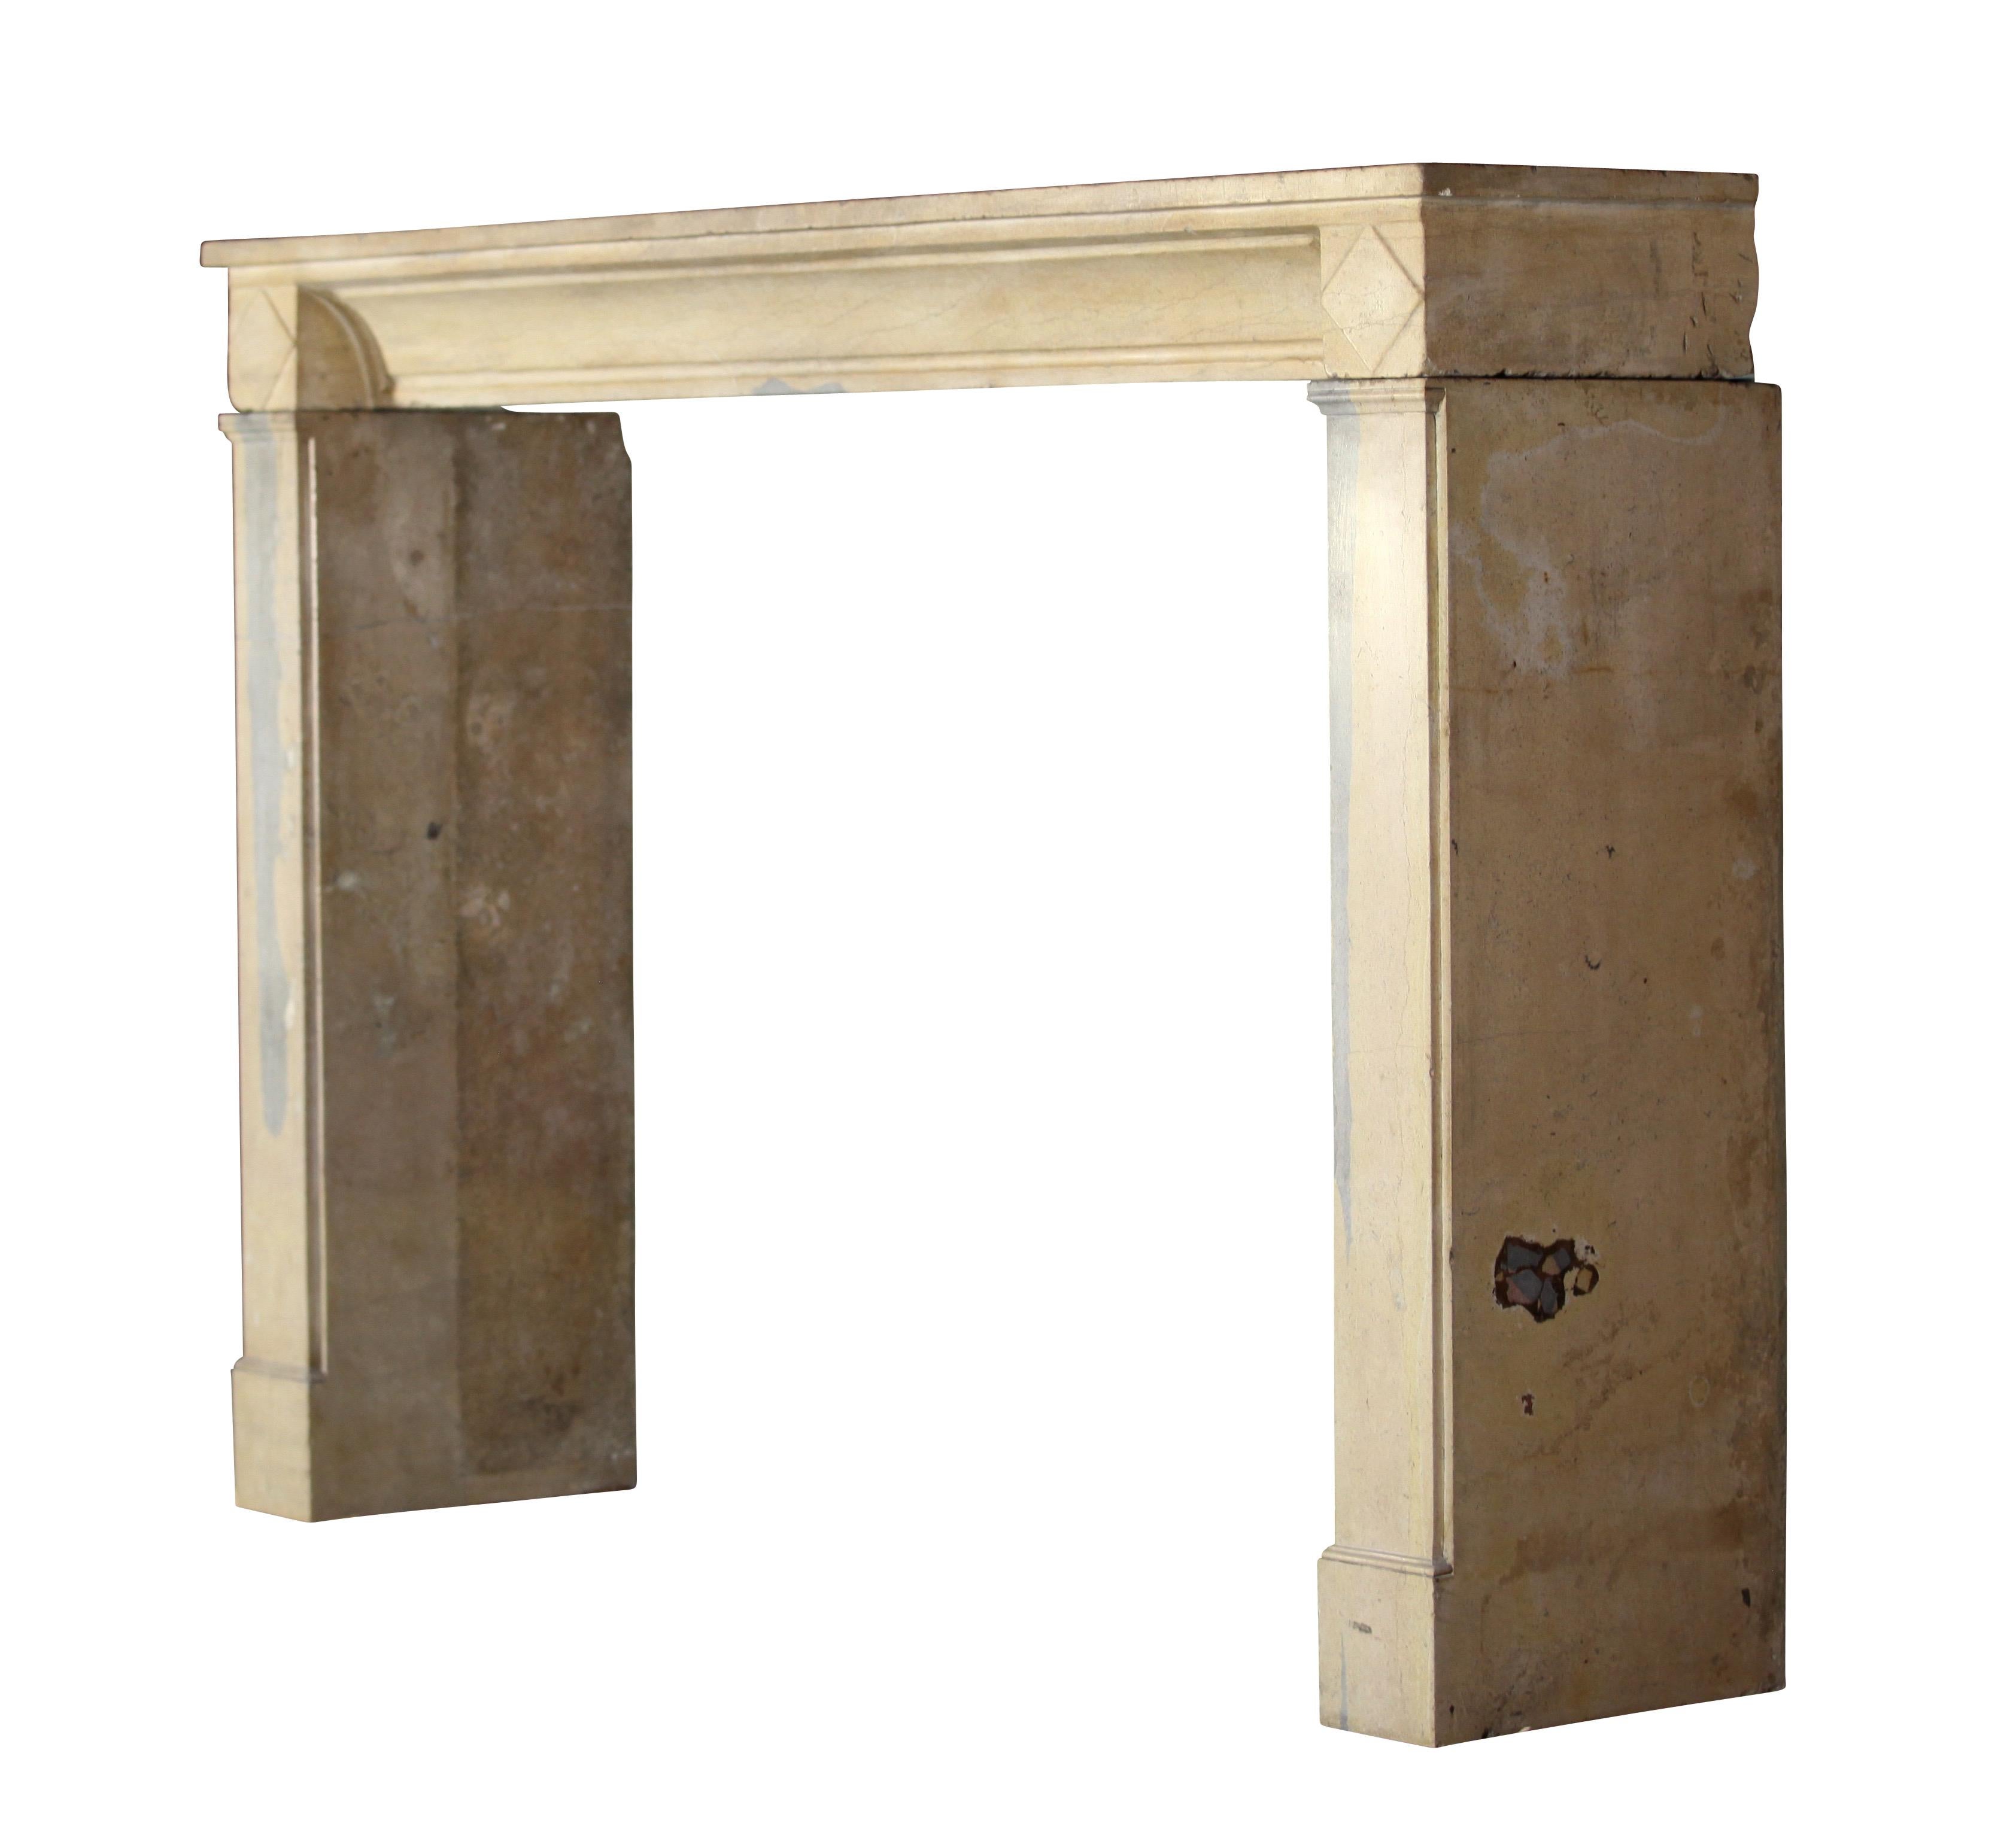 A bicolor shiny hard stone fireplace surrounds, limestone fireplace mantel from an abbey in the Beaujolais region made in the 19th century.
Measures:
161 cm exterior width 63.39 inch
113 cm exterior height 44.49 inch
134 cm interior width 52.76